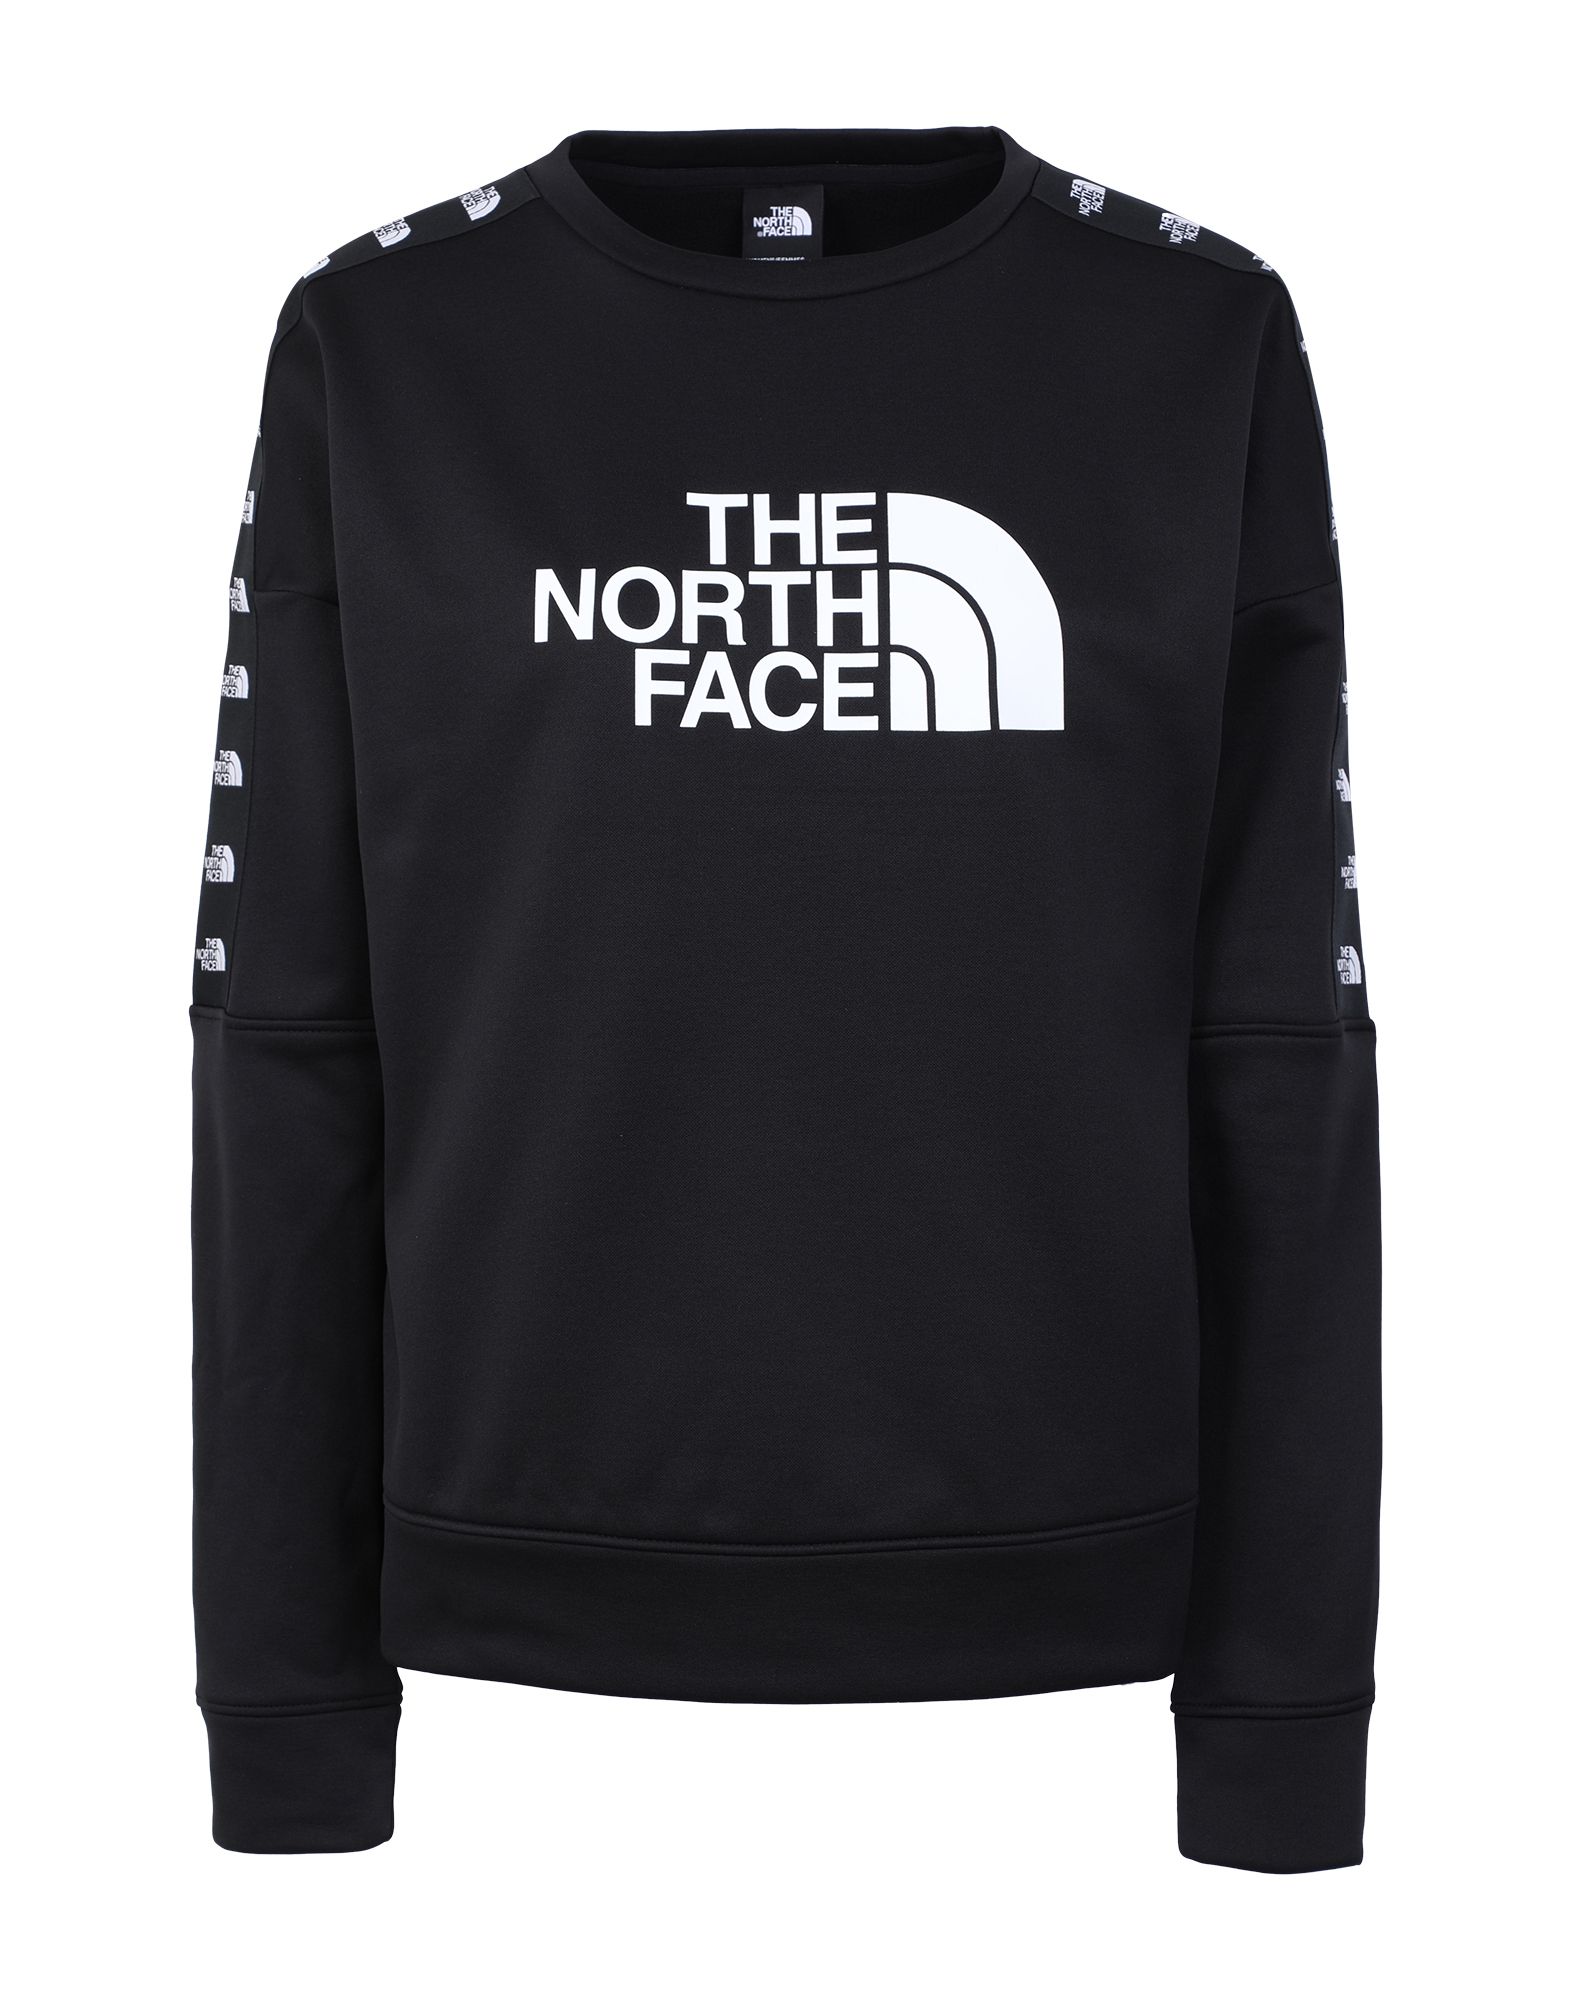   THE NORTH FACE